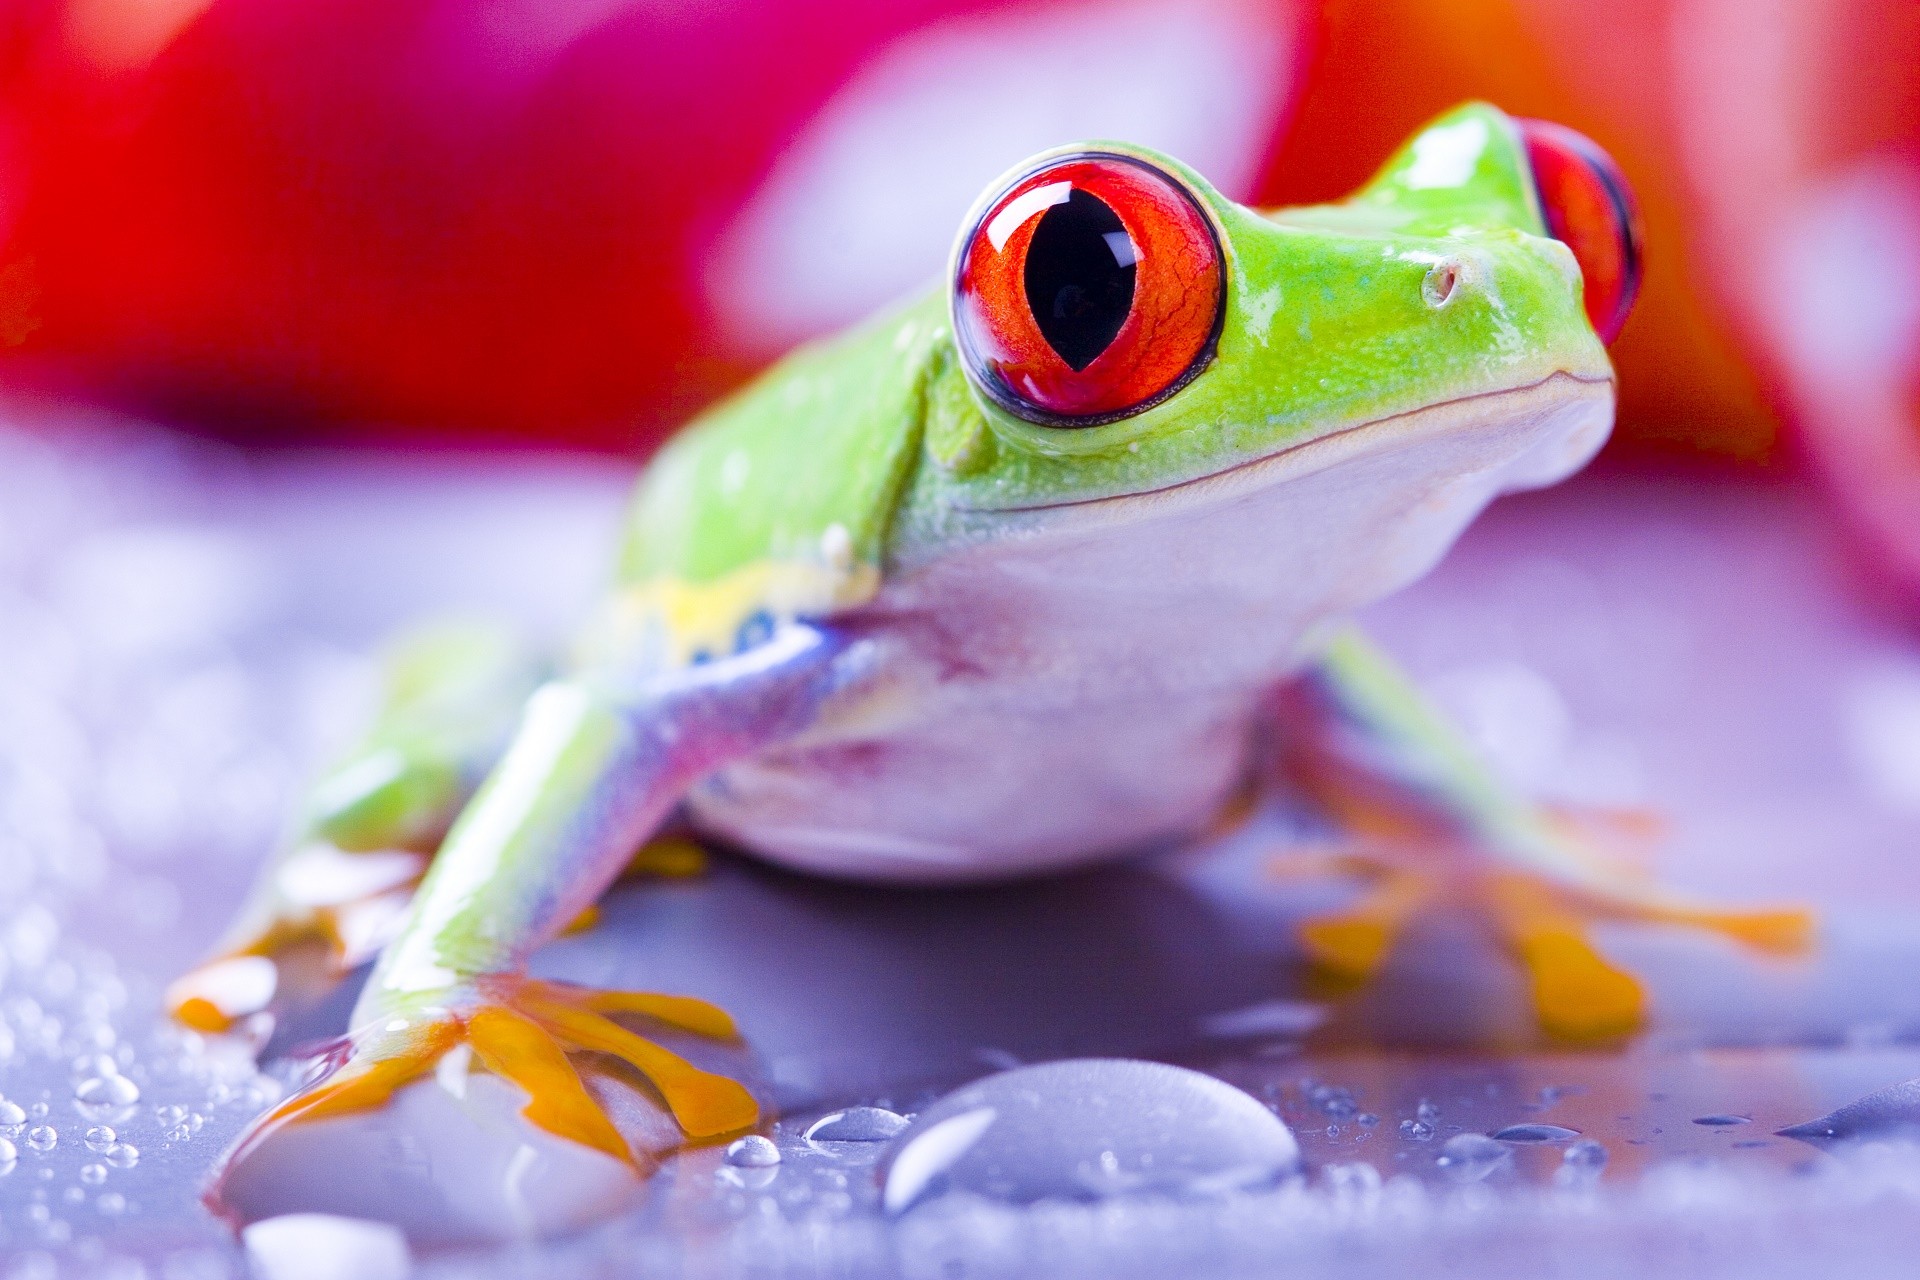 General 1920x1280 Red-Eyed Tree Frogs frog water drops amphibian nature animals animal eyes